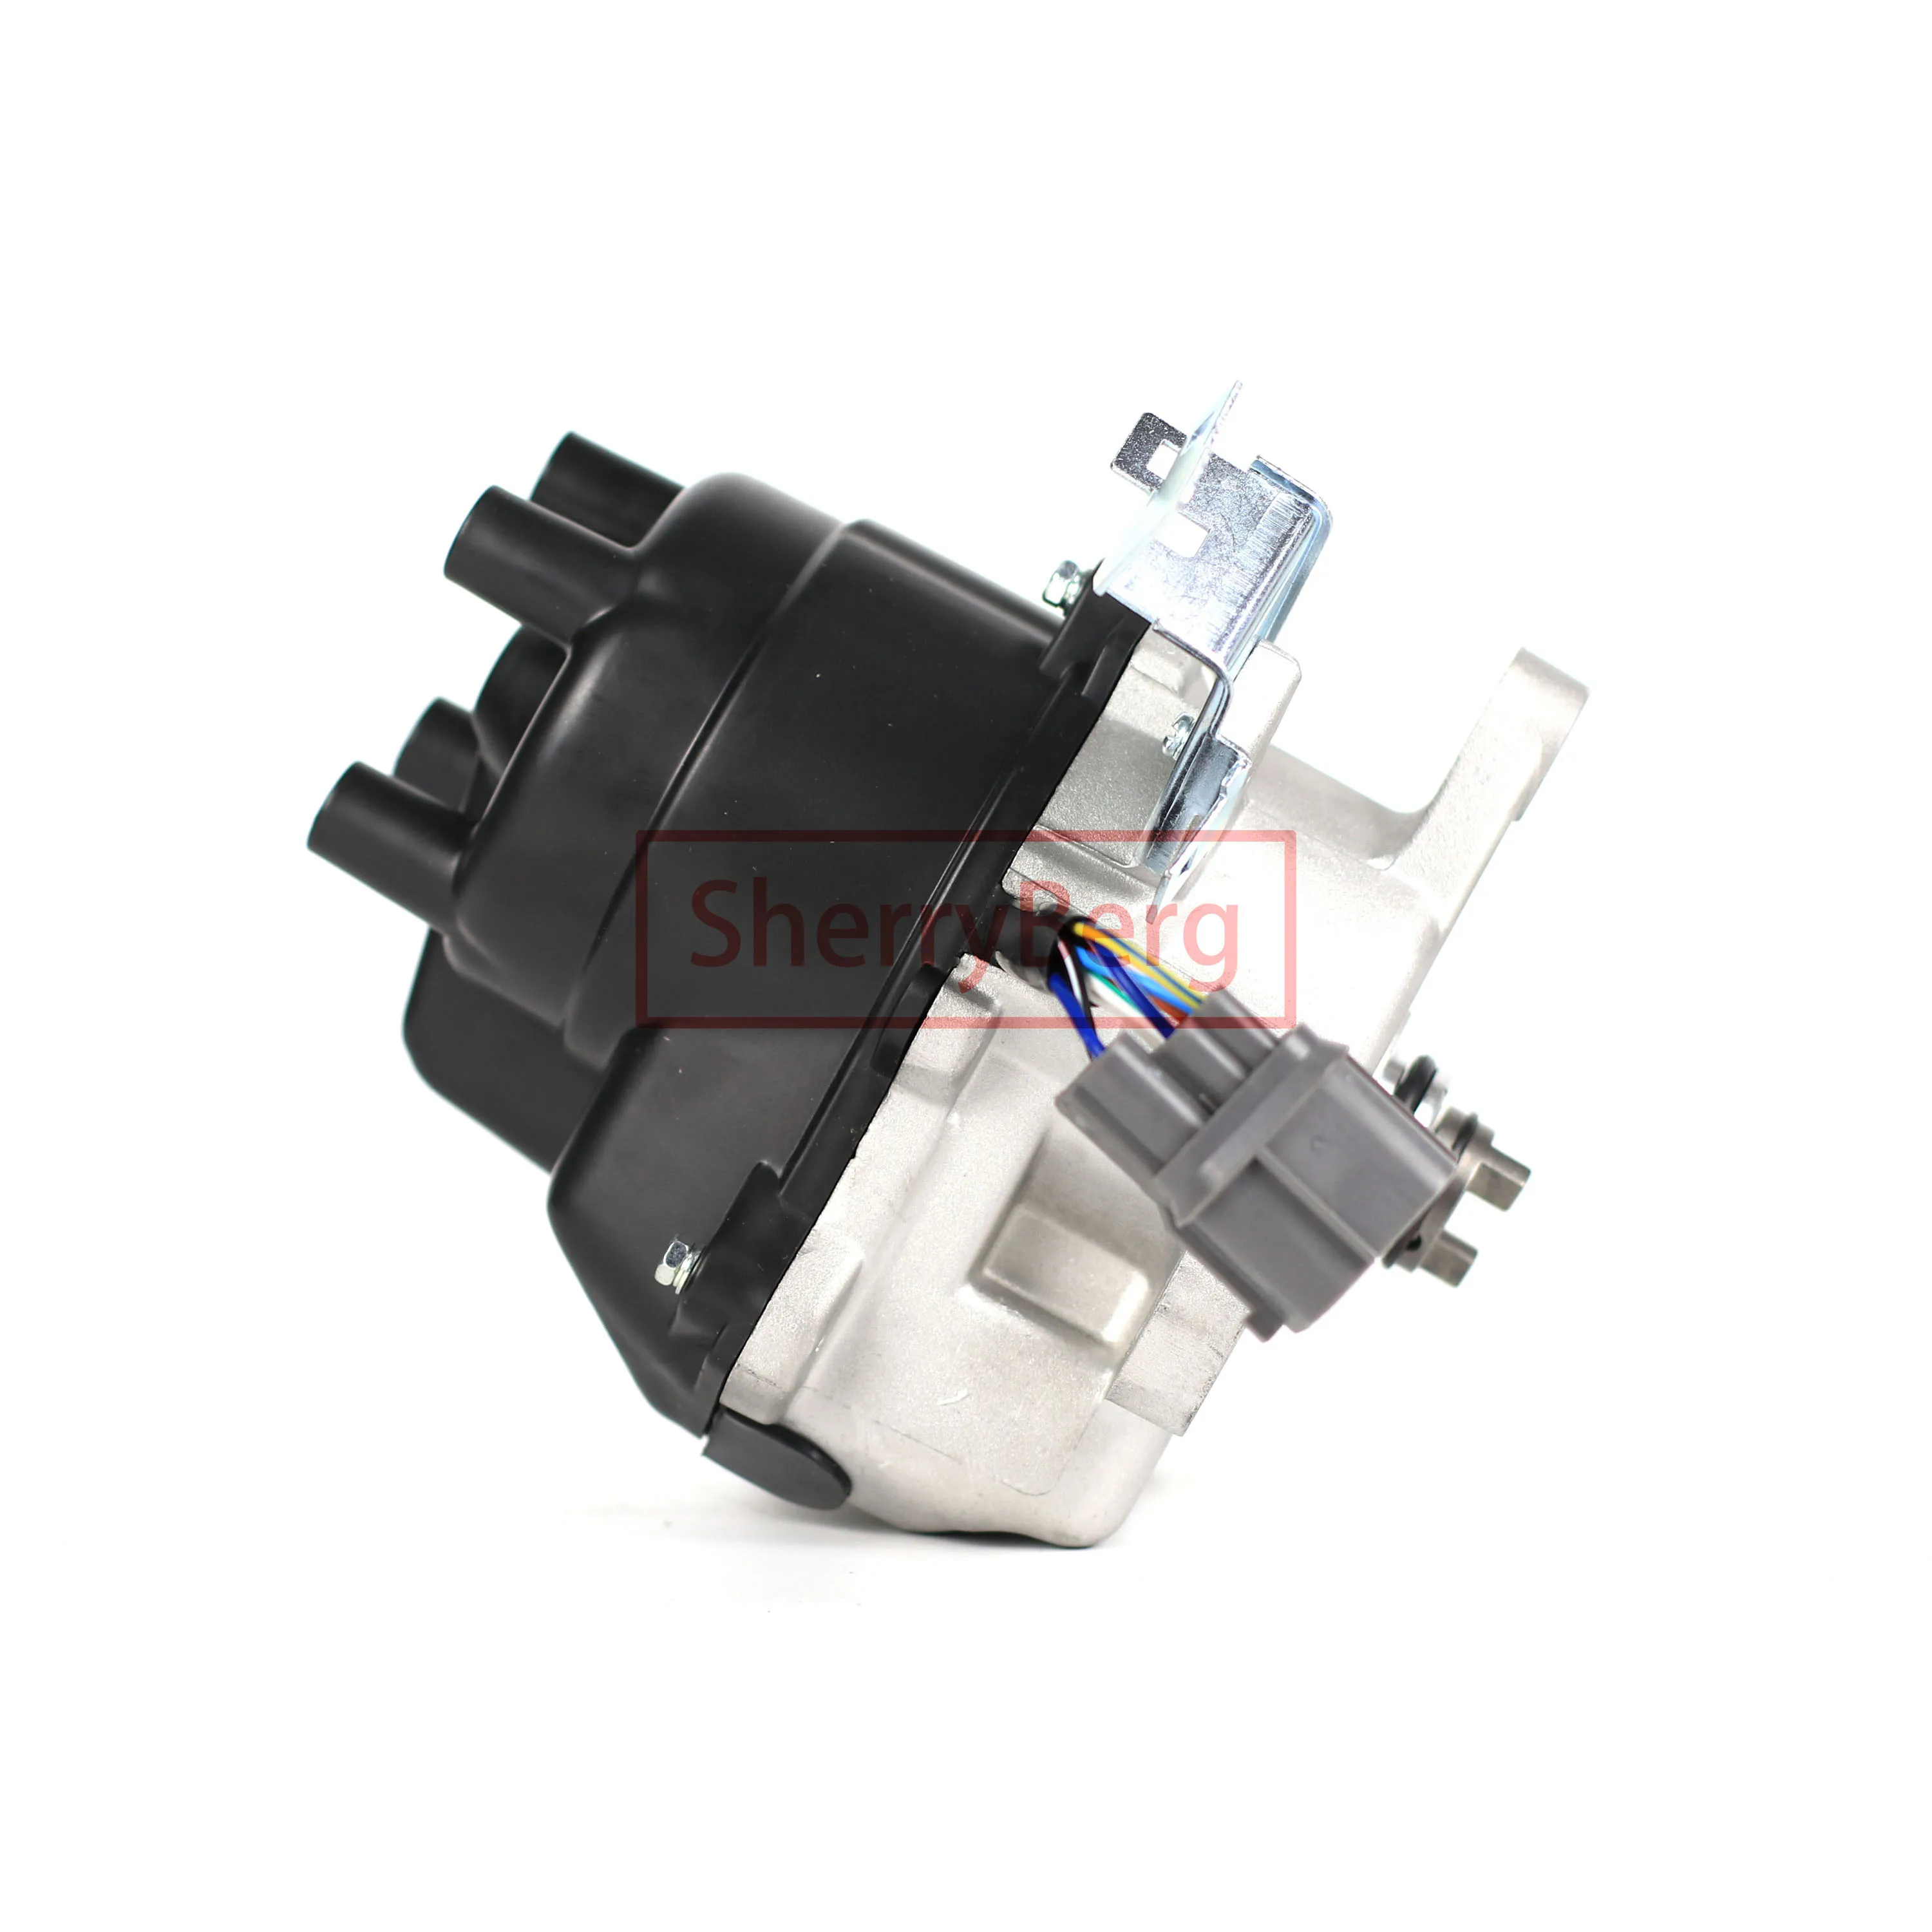 

FREE SHIPPING SherryBerg NEW Complete DISTRIBUTOR FITS FOR HONDA ACCORD 2.2L 1994 1995 30100P0AA02 D4T9405 30105-P0A-A02